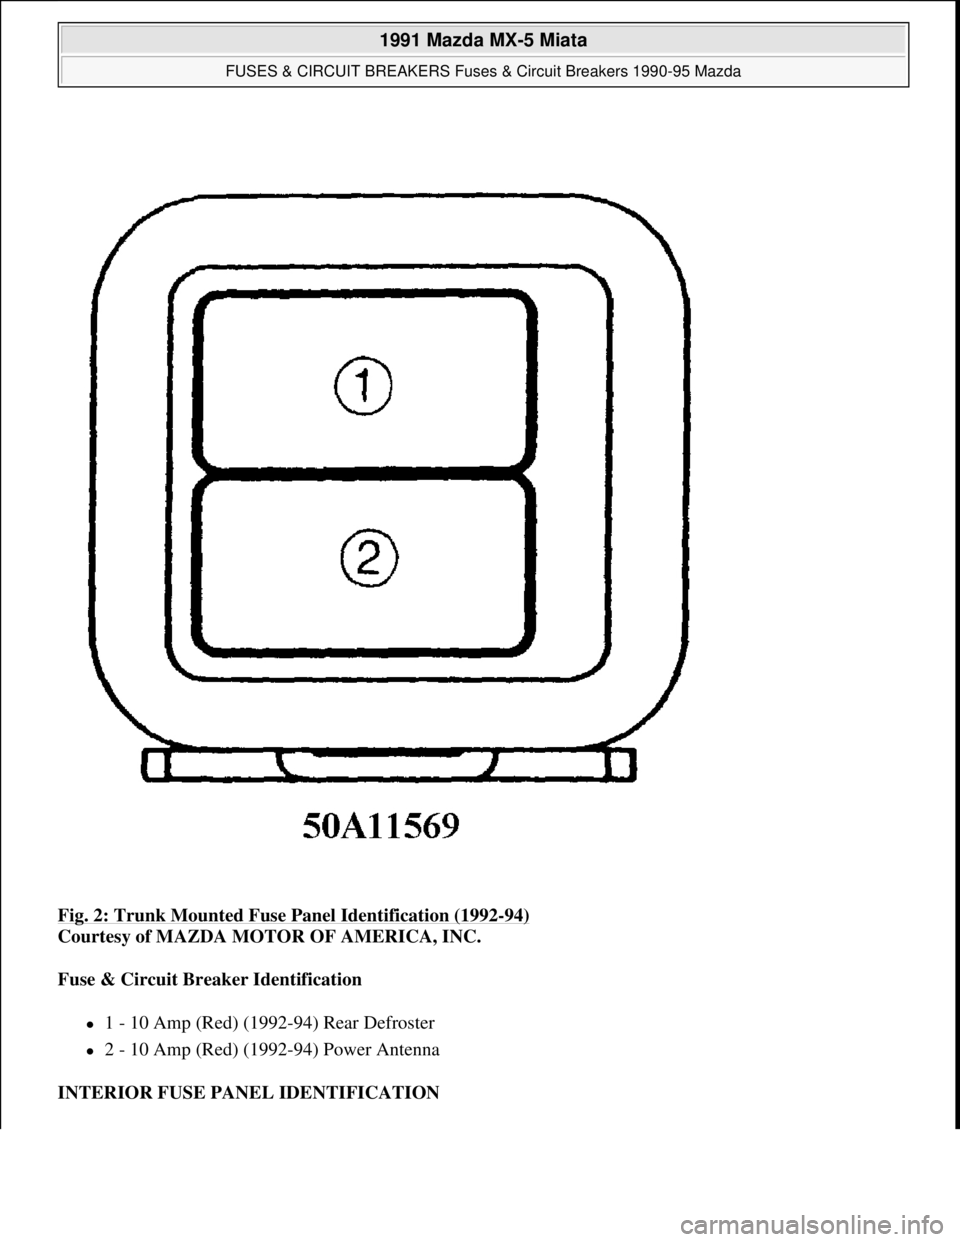 MAZDA MIATA 1991  Factory Service Manual Fig. 2: Trunk Mounted Fuse Panel Identification (1992-94) 
Courtesy of MAZDA MOTOR OF AMERICA, INC. 
Fuse & Circuit Breaker Identification  
1 - 10 Amp (Red) (1992-94) Rear Defroster  
2 - 10 Am